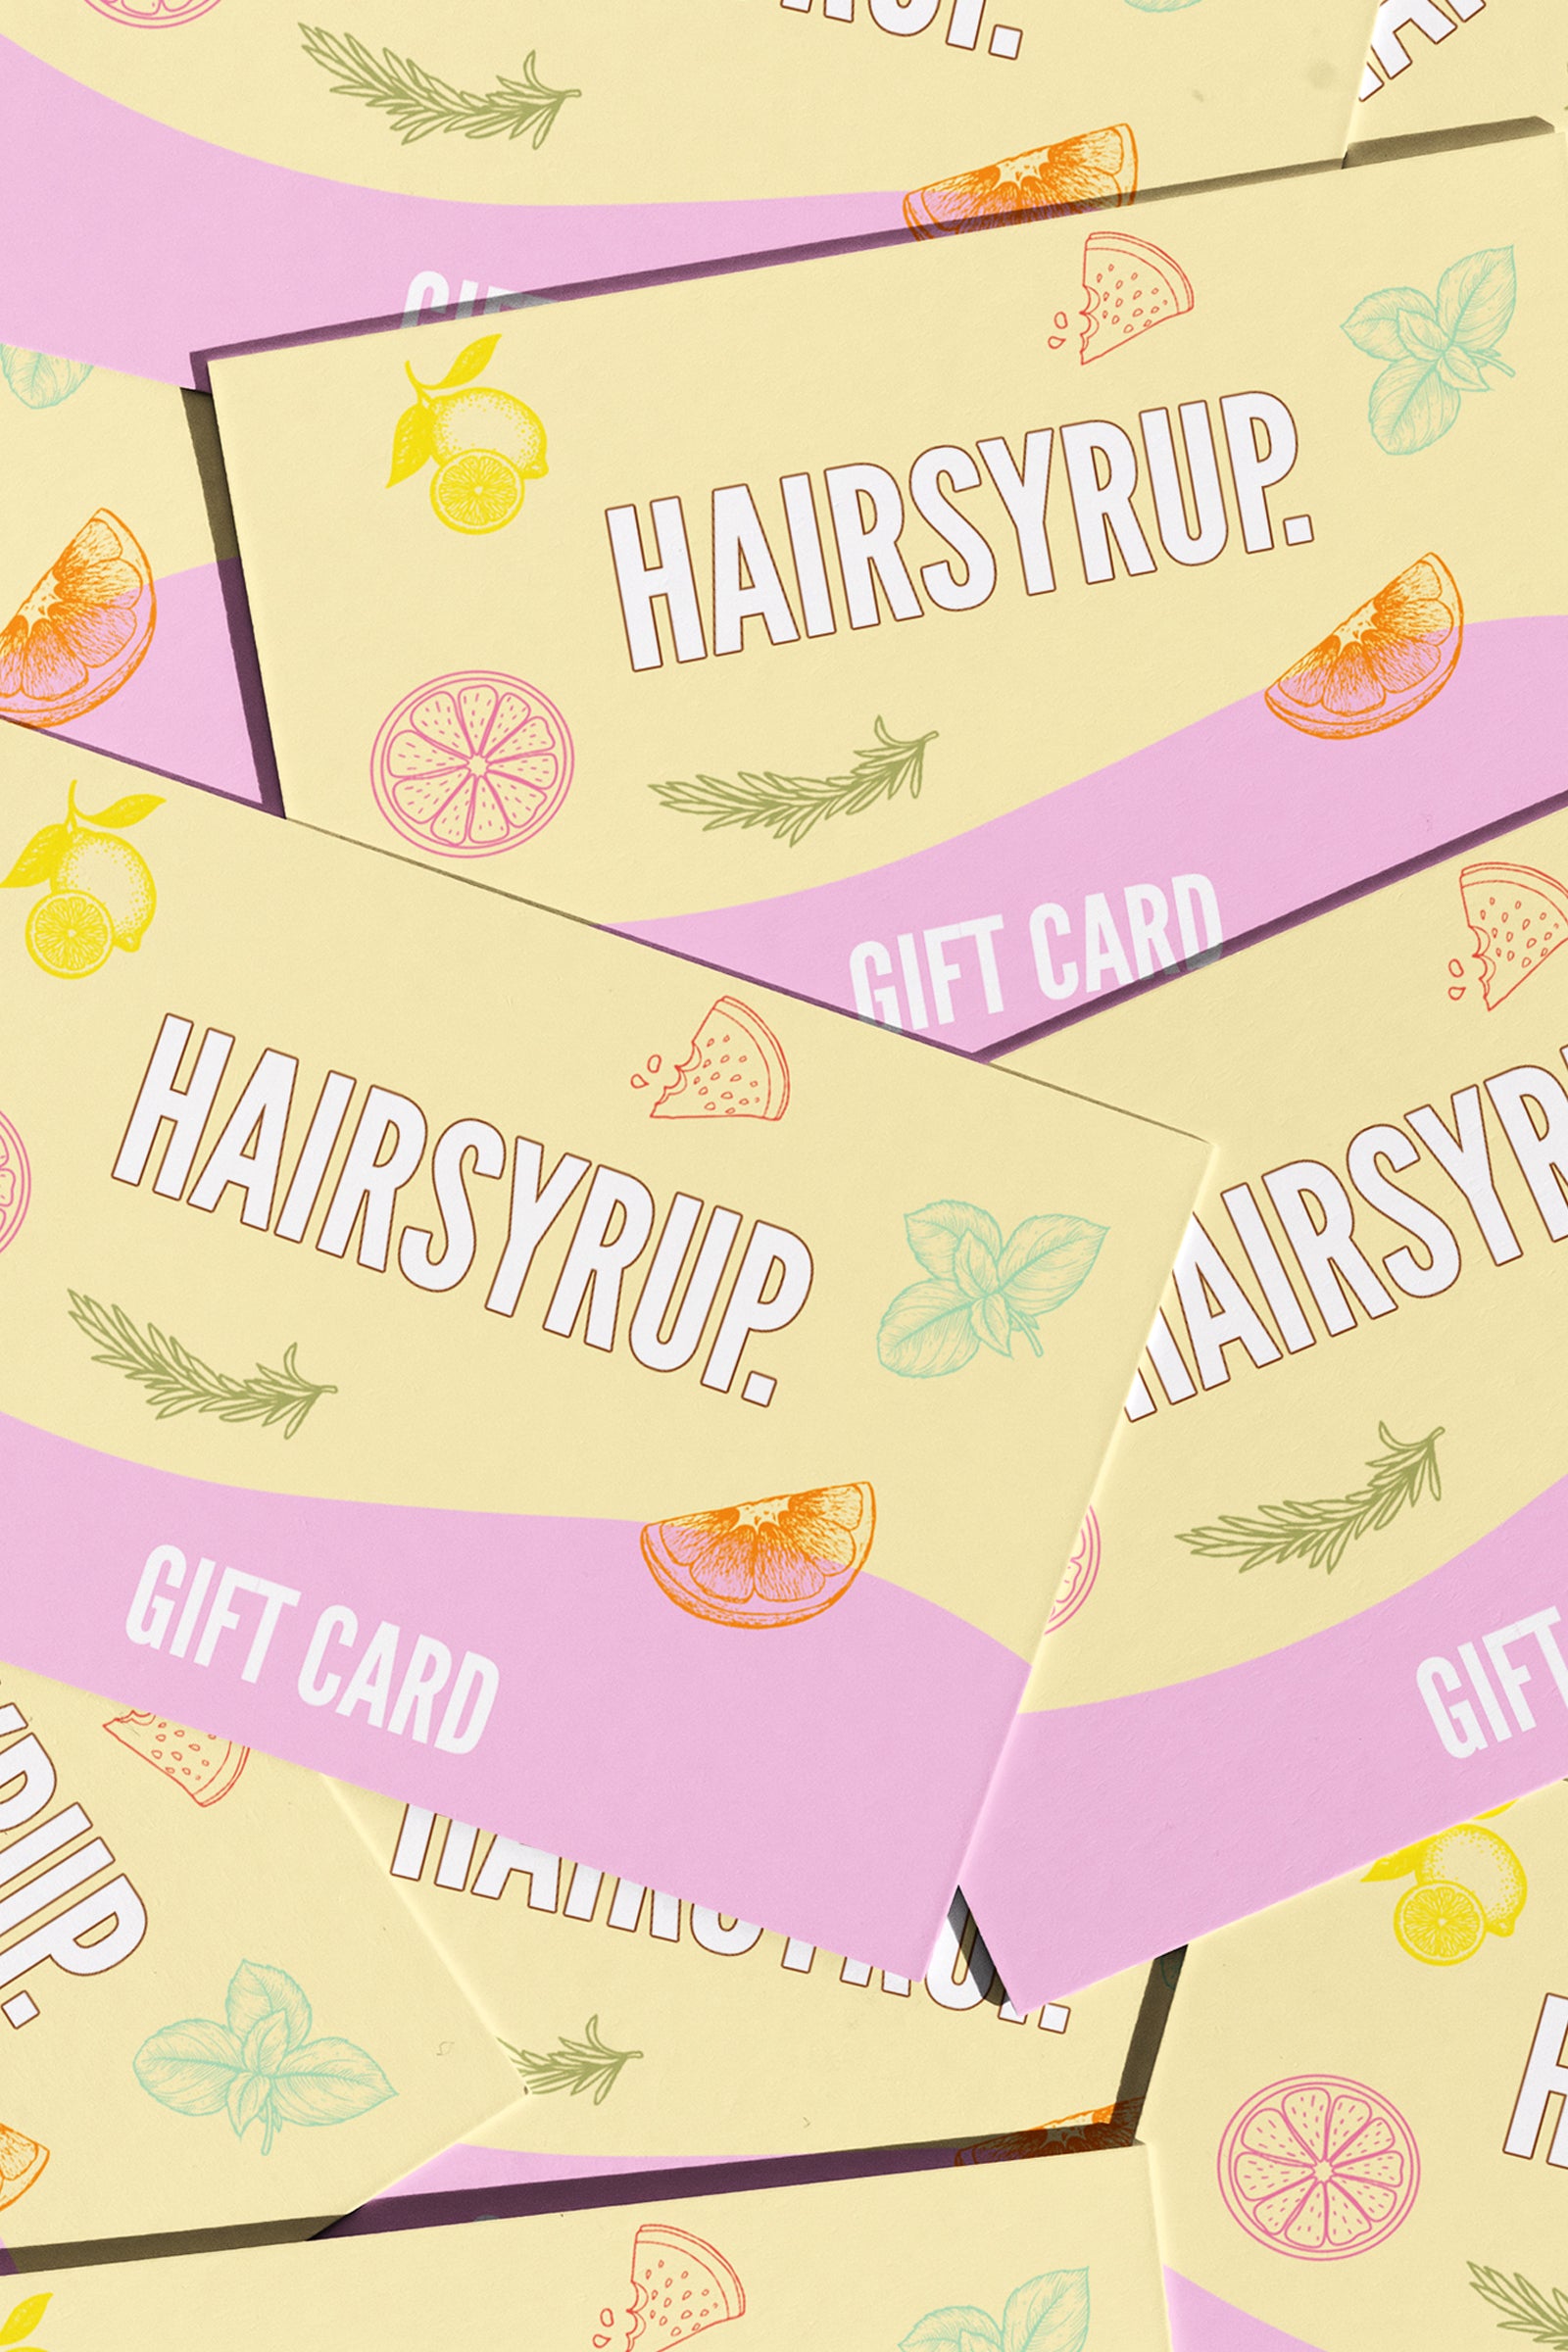 Hair Syrup Gift Card 🍯 Please only add a gift card to your basket no other products thank you. ❤️